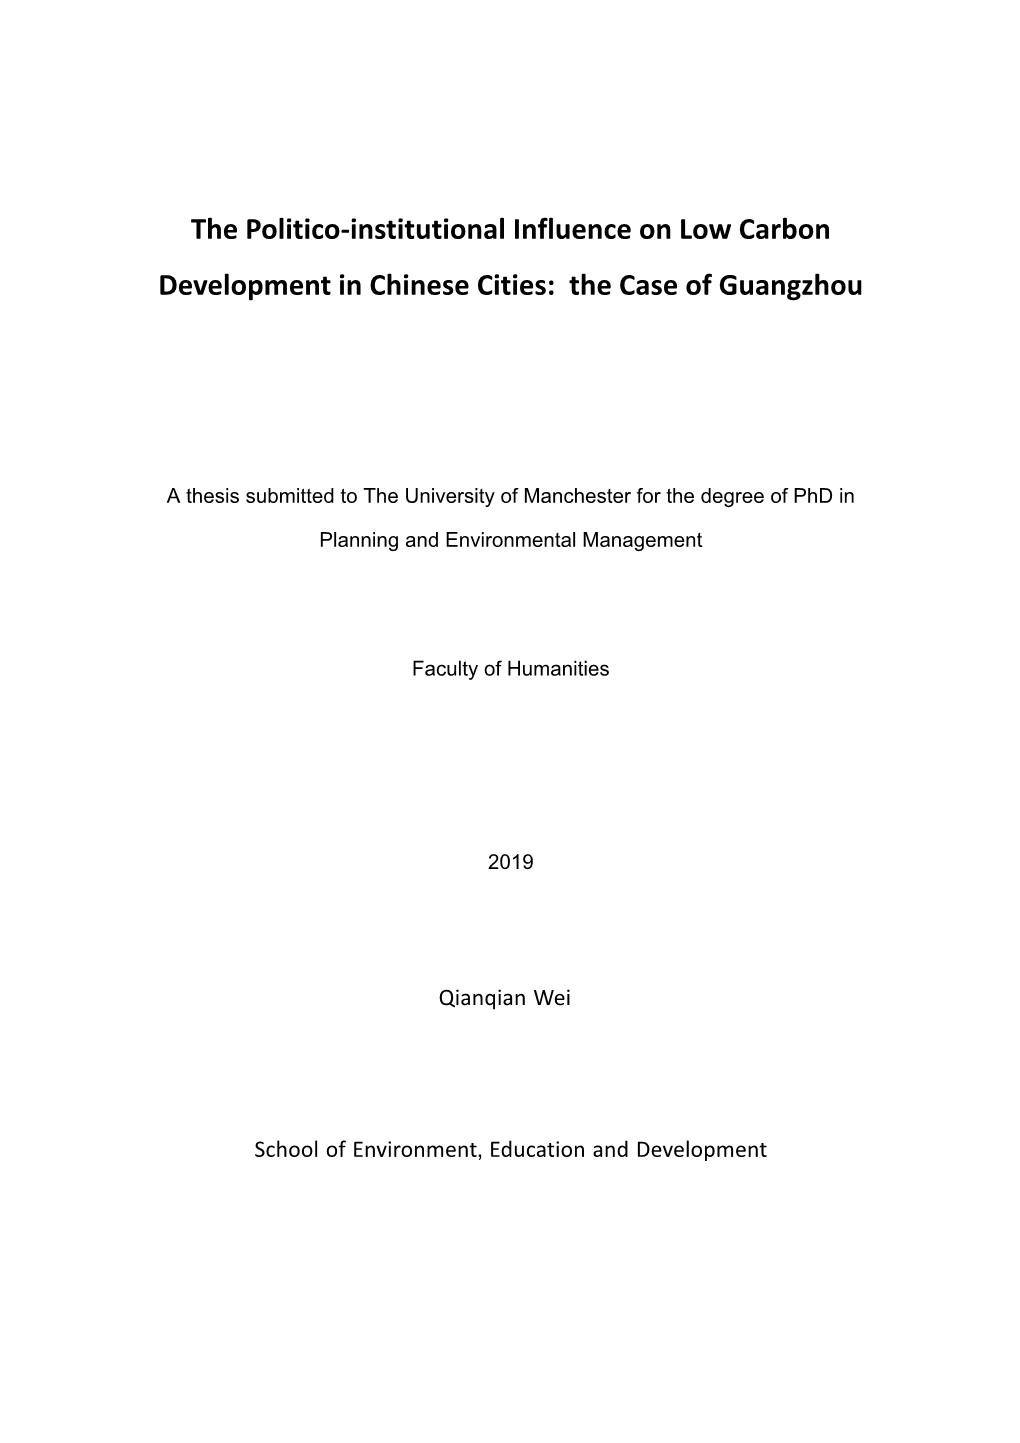 The Politico-Institutional Influence on Low Carbon Development in Chinese Cities: the Case of Guangzhou